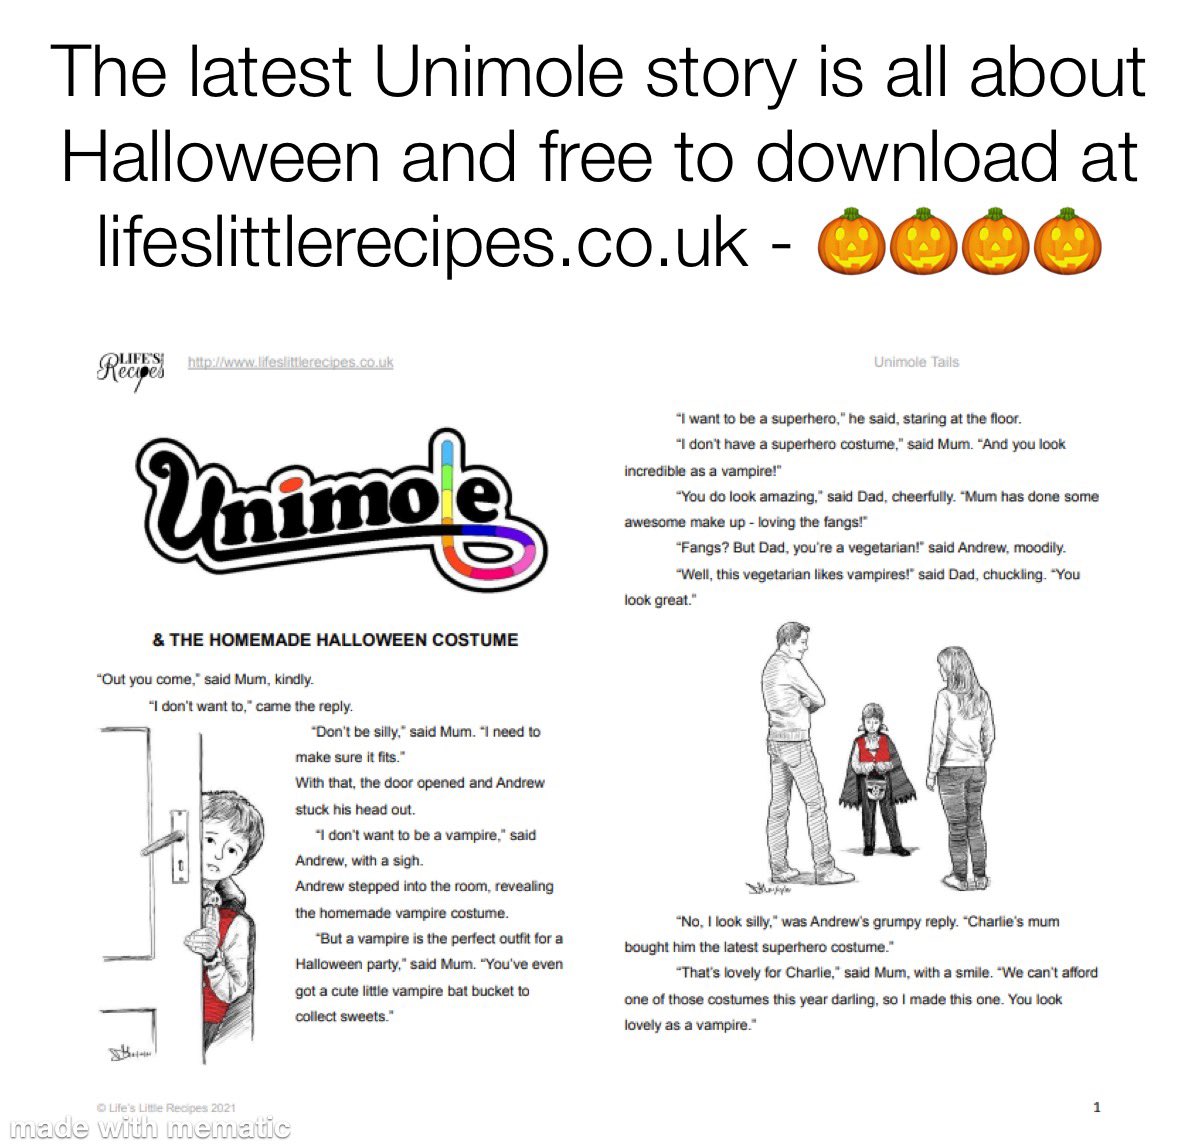 Have you met #Unimole yet? I’m working with @LifesLittleRec bringing #Unimole to life in a series of #bedtime stories. Illustrated by Dave Meadows of @pushed_design these stories are free to download. Don’t miss them! lifeslittlerecipes.co.uk #halloween #writing #familycontent